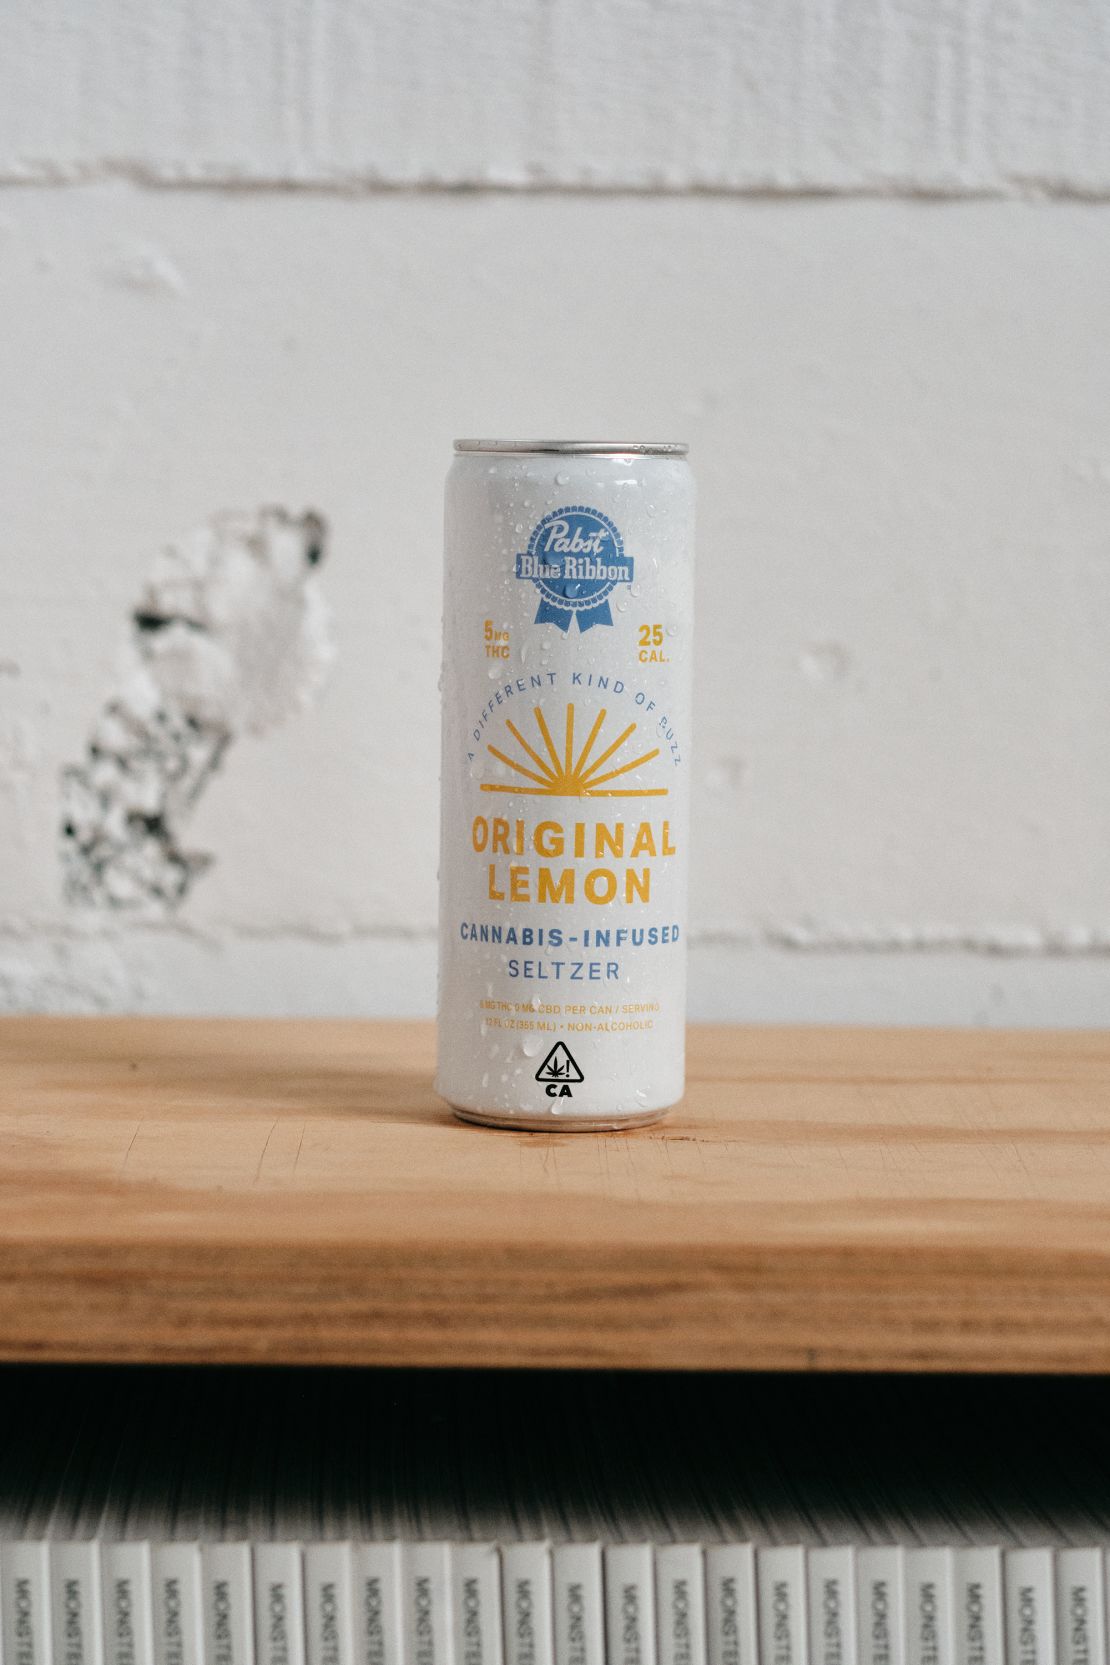 Pabst Blue Ribbon lent its name to this lemon-flavored sparkling water that's infused with 5mg of THC. 